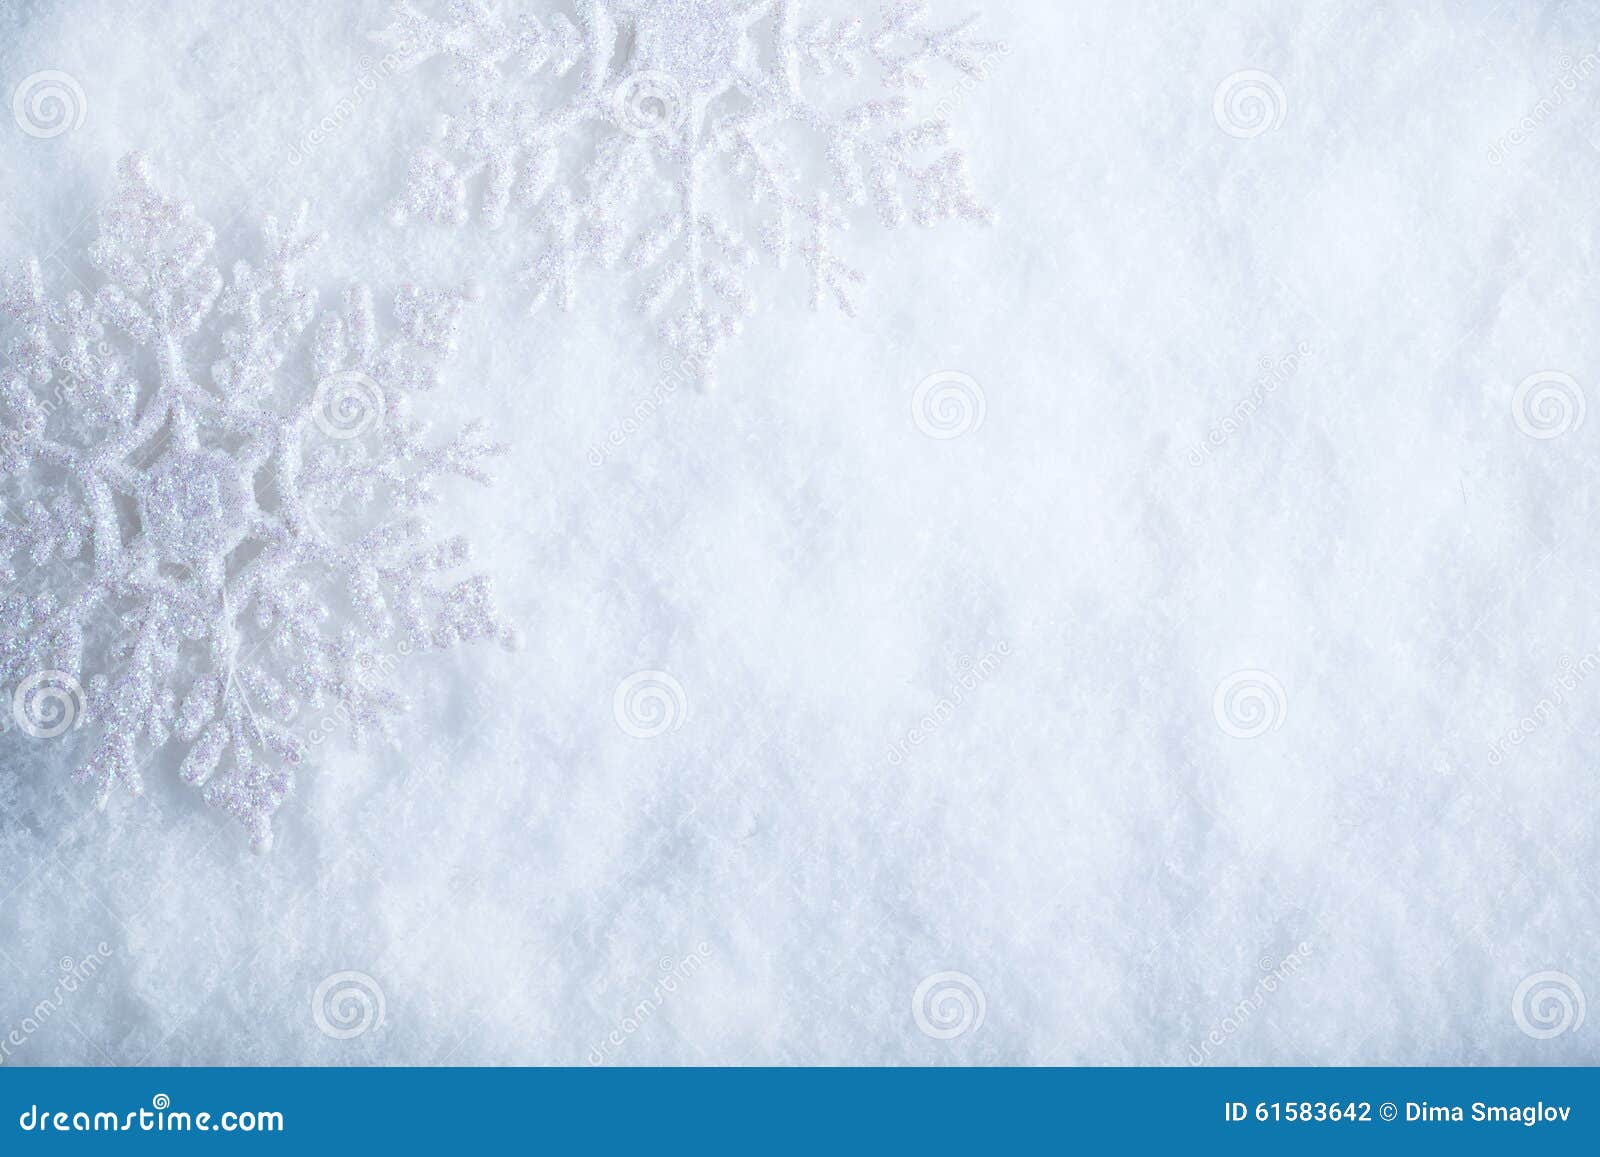 two beautiful sparkling vintage snowflakes on a white frost snow background. winter and christmas concept